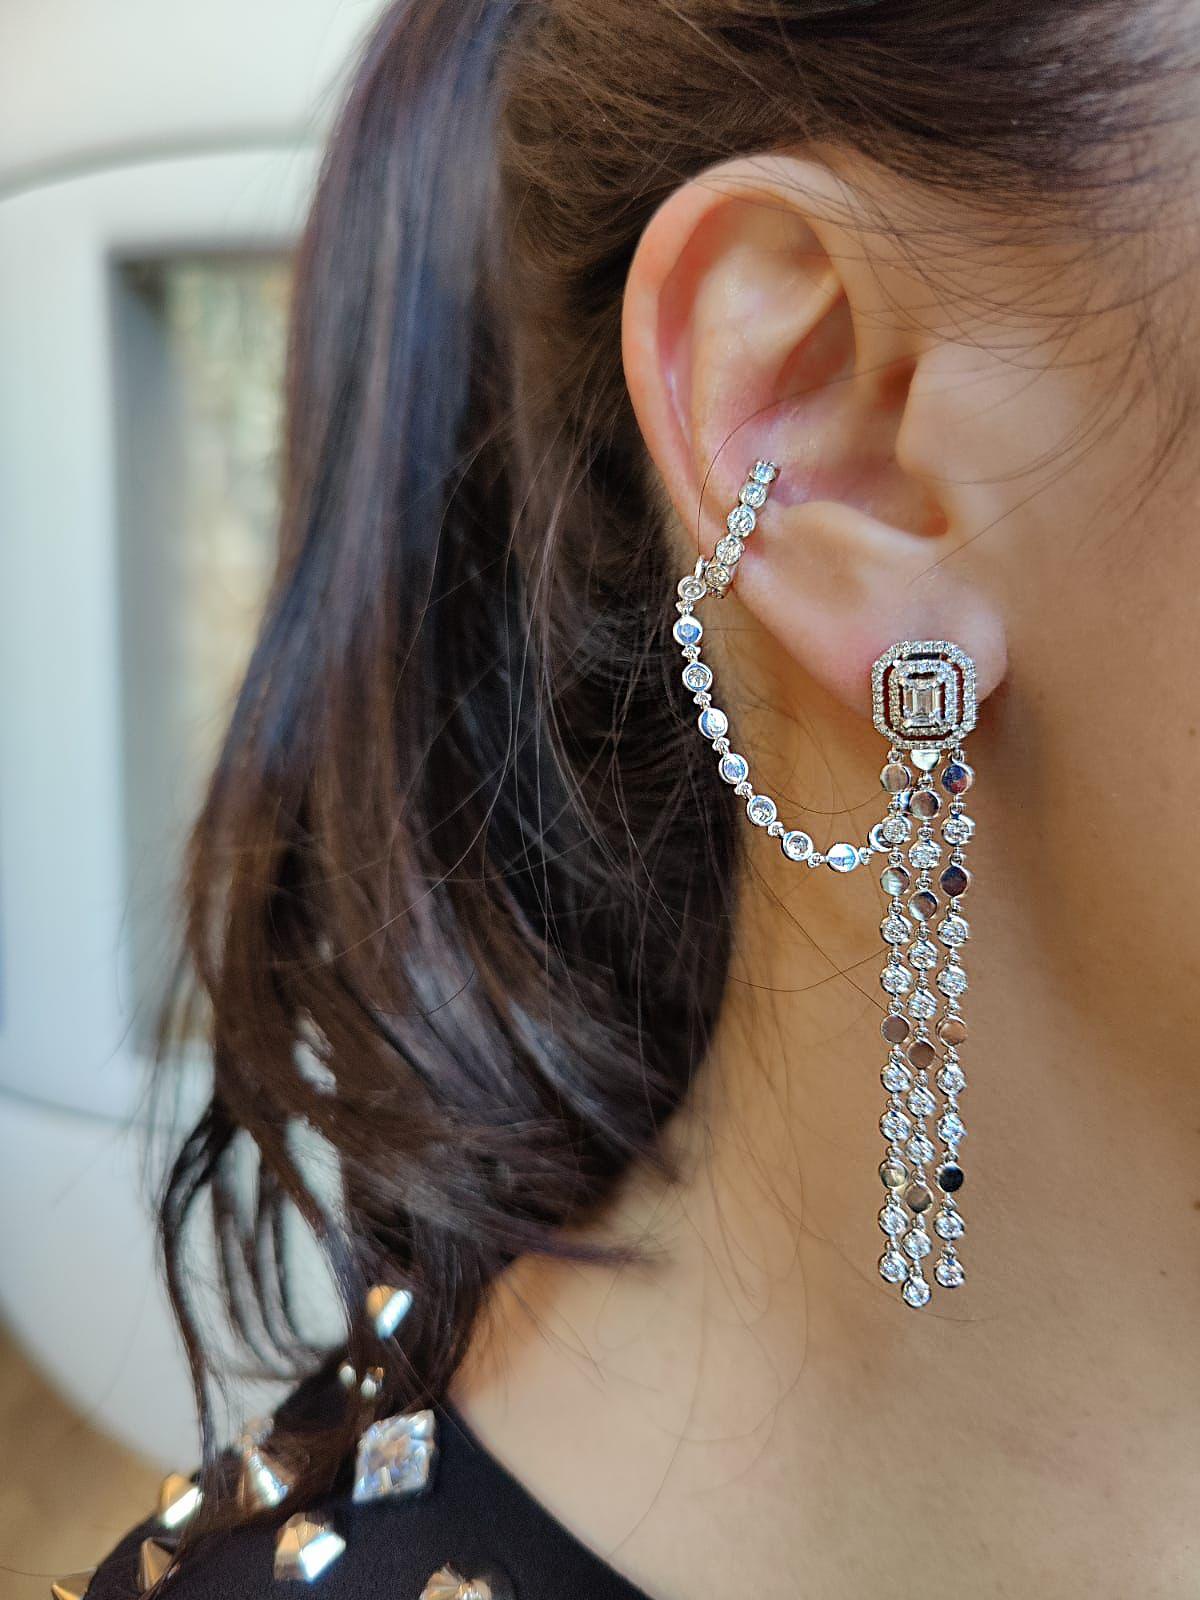 The Messika D-Vibes multi-row earrings in white gold and diamonds are both elegant and graceful, and will add a touch of class to any look. Alternating all-gold and diamond-set motifs, they feature 2 emerald-cut diamonds of 0.30 carat each that will